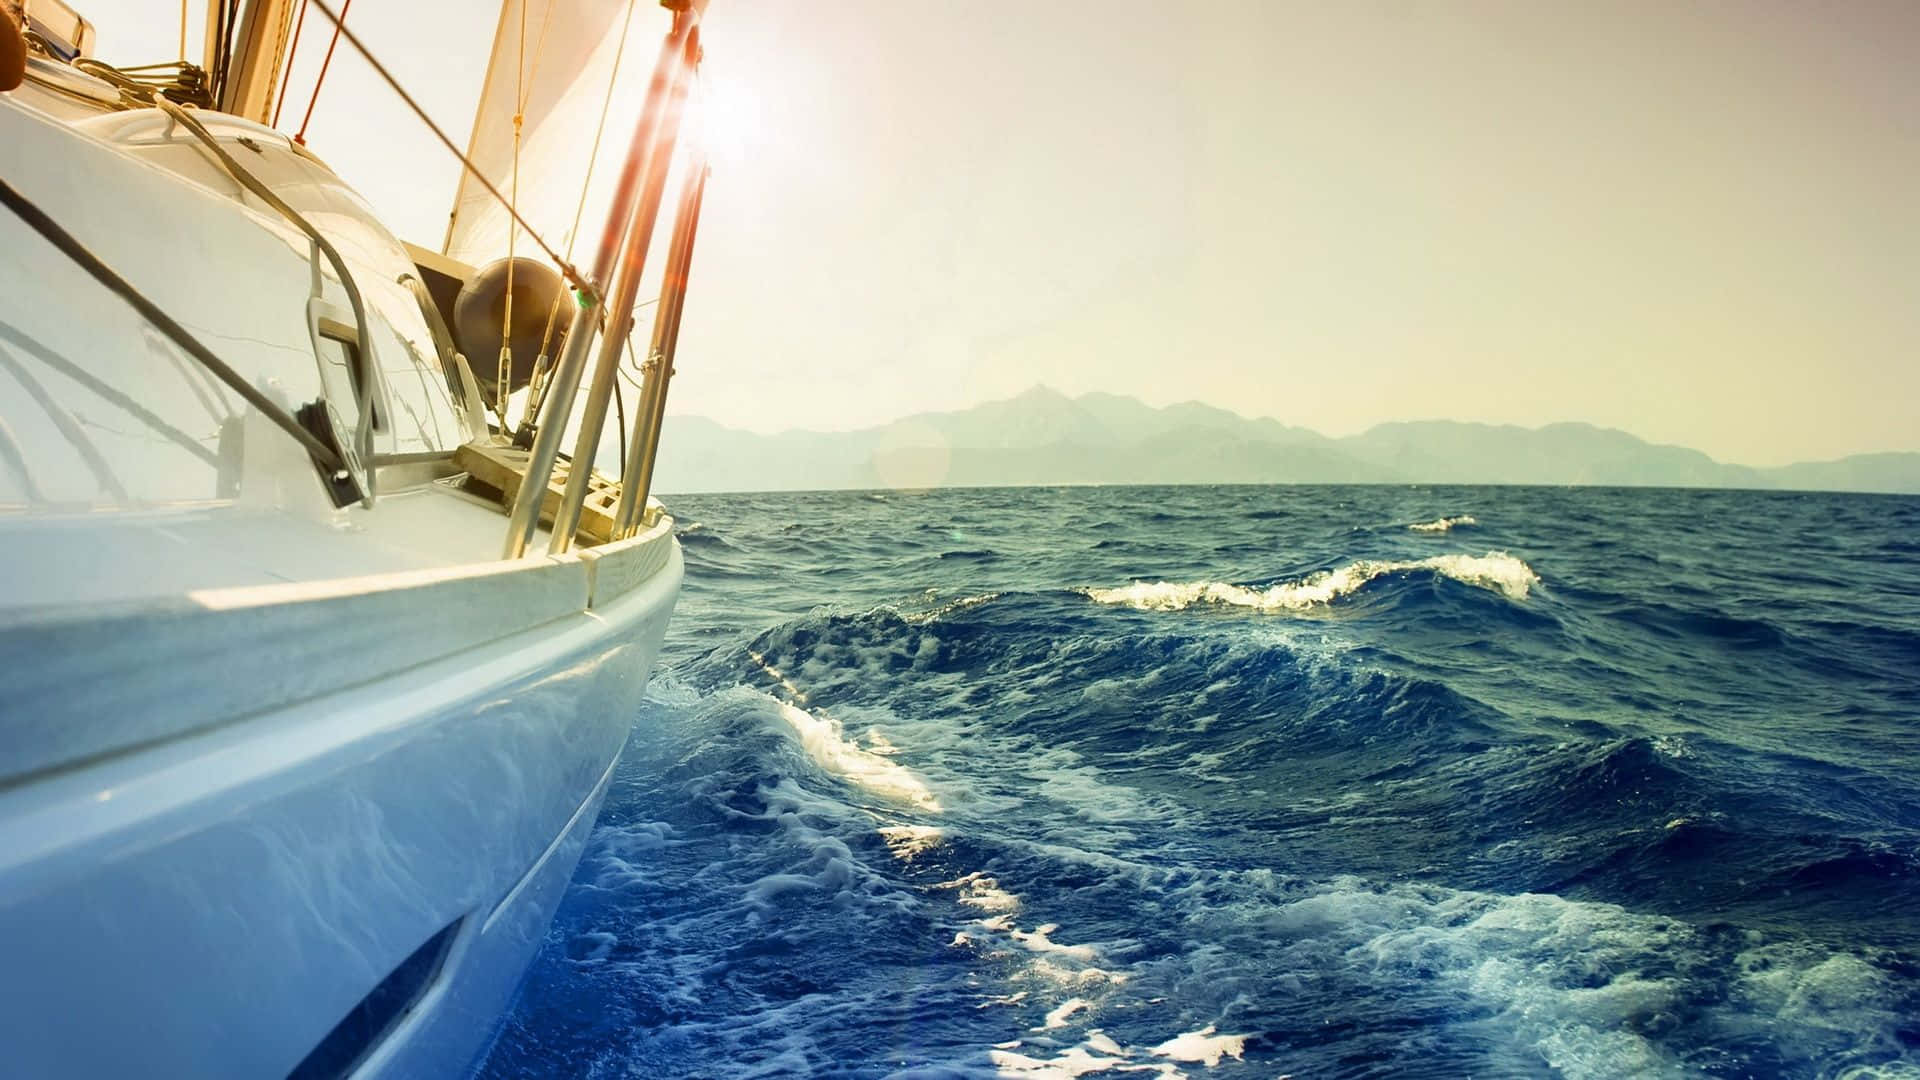 An image of a Sailboat enjoying a peaceful journey on the open seas